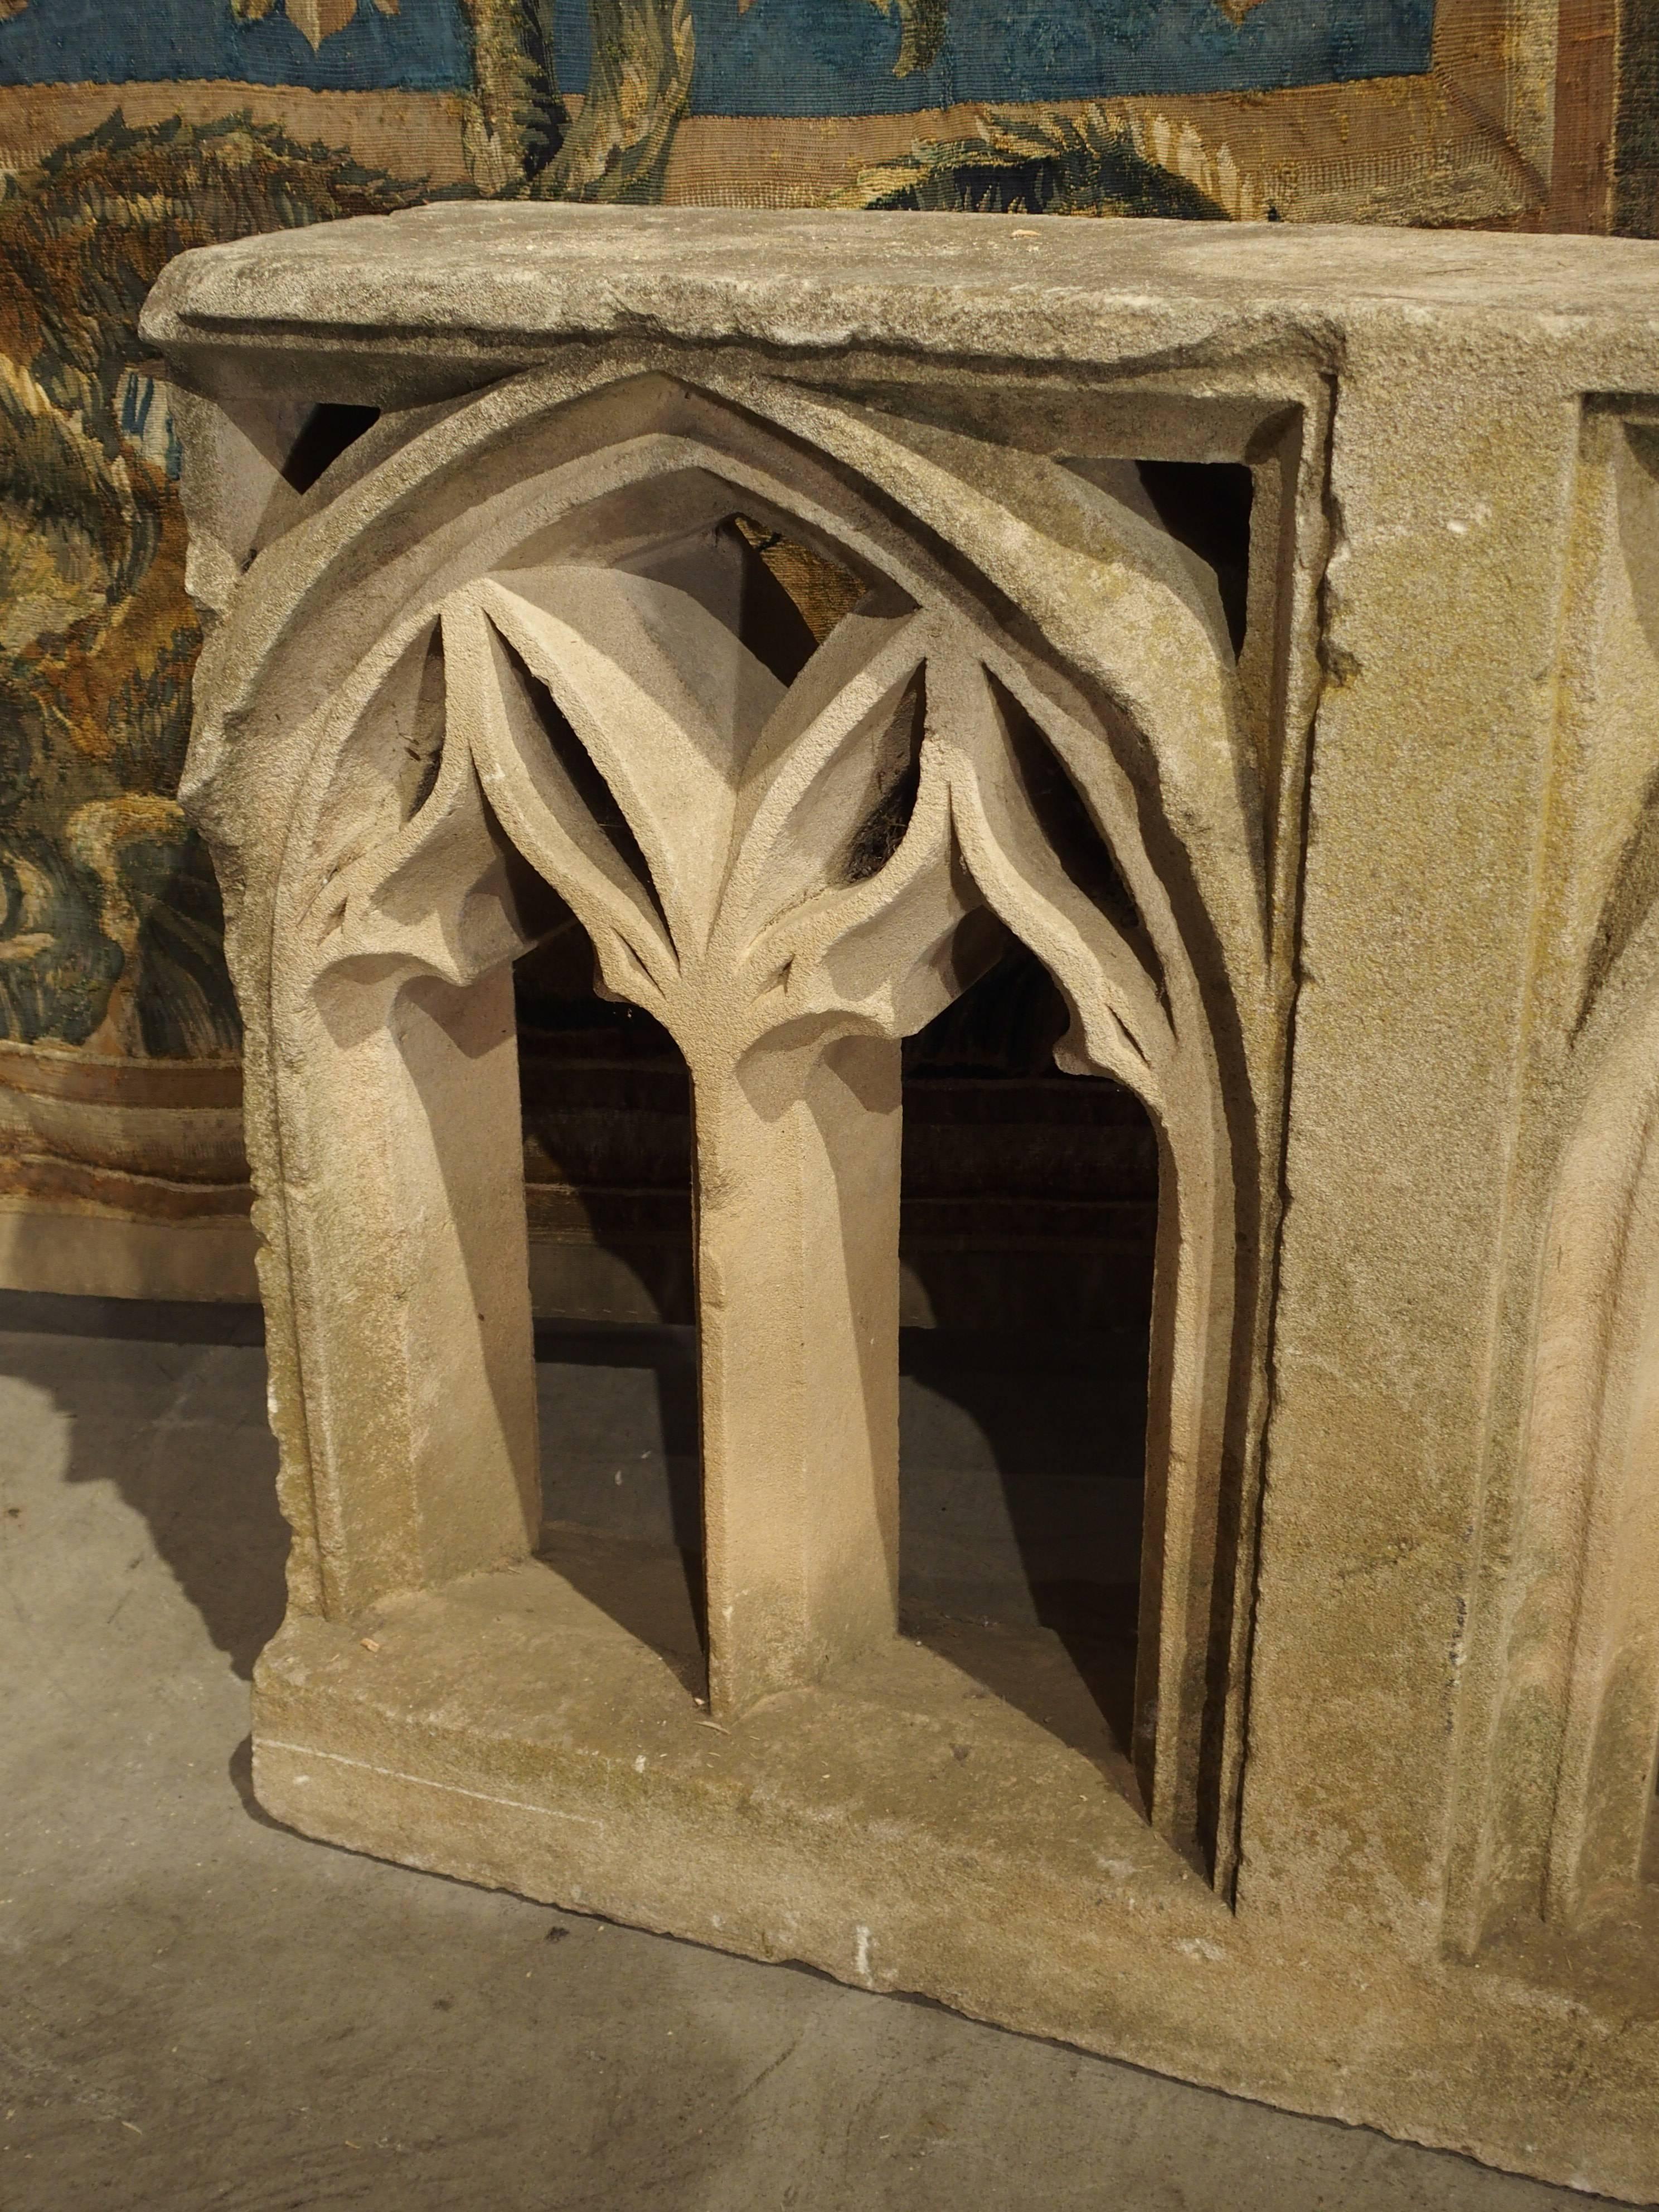 This rare antique French Gothic fragment was once part of the decoration on an 18th century stone building in France. It features a pointed arch with pierced designs on columns and a base. Once a single element, it is now in two pieces. Antique